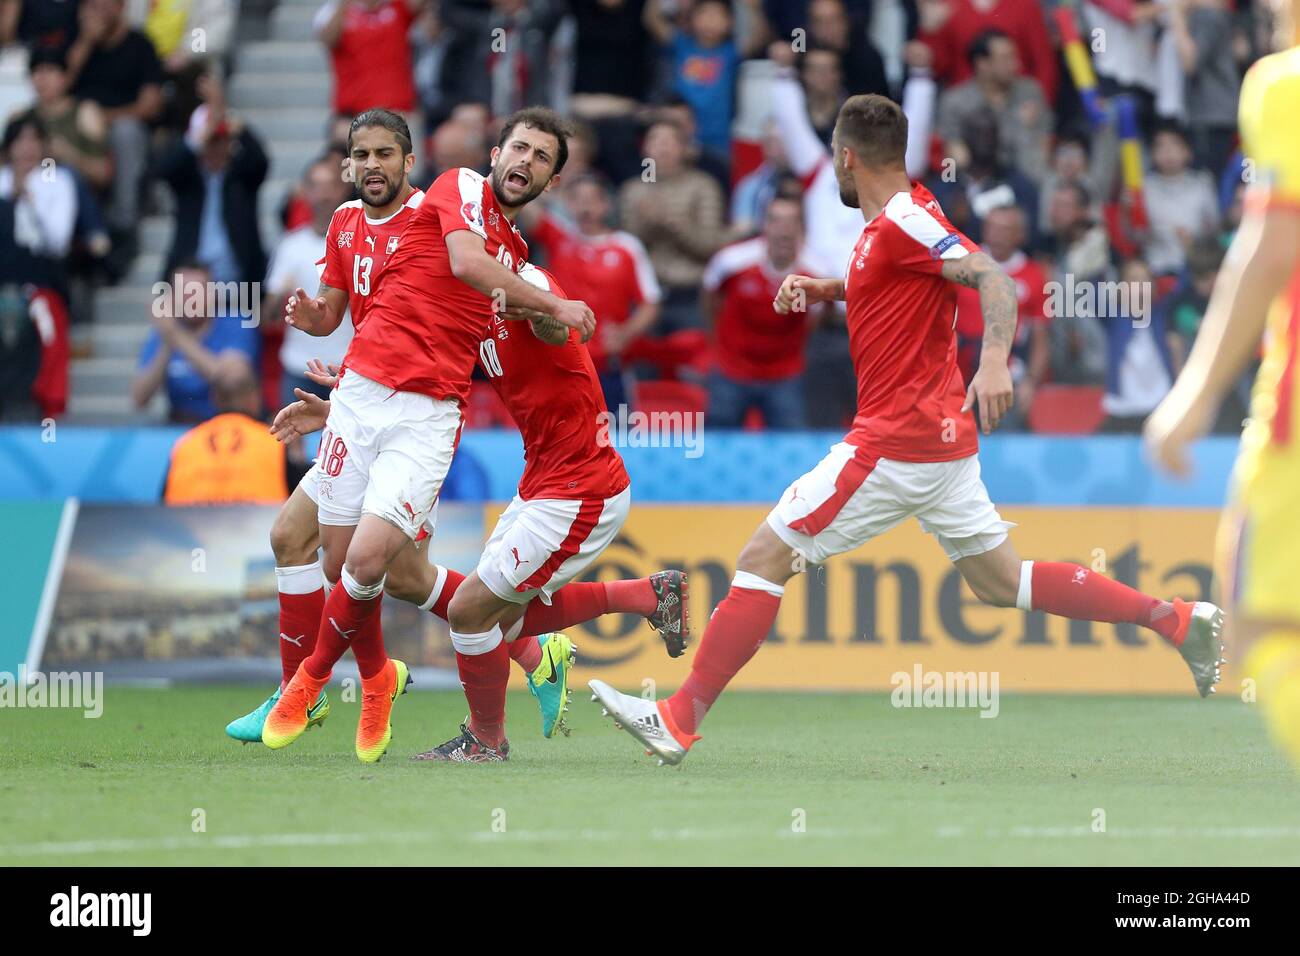 Admir Mehmedi of Switzerland celebrates scoring his sides first goal during the UEFA European Championship 2016 match at the Parc des Princes, Paris. Picture date June 15th, 2016 Pic Phil Oldham/Sportimage via PA Images Stock Photo